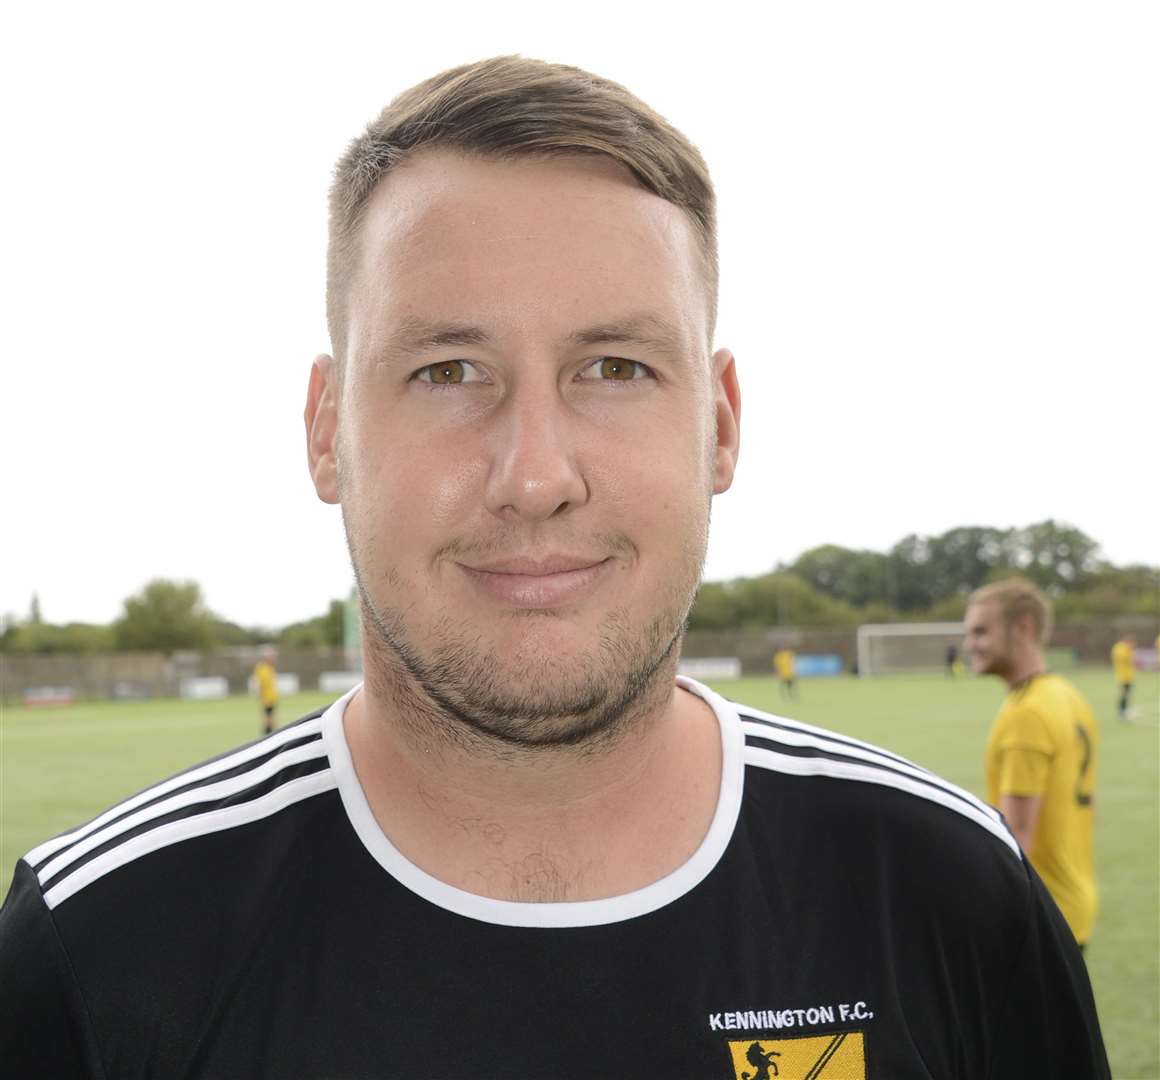 Dan Scorer guided Kennington to the top of the Southern Counties East Division 1